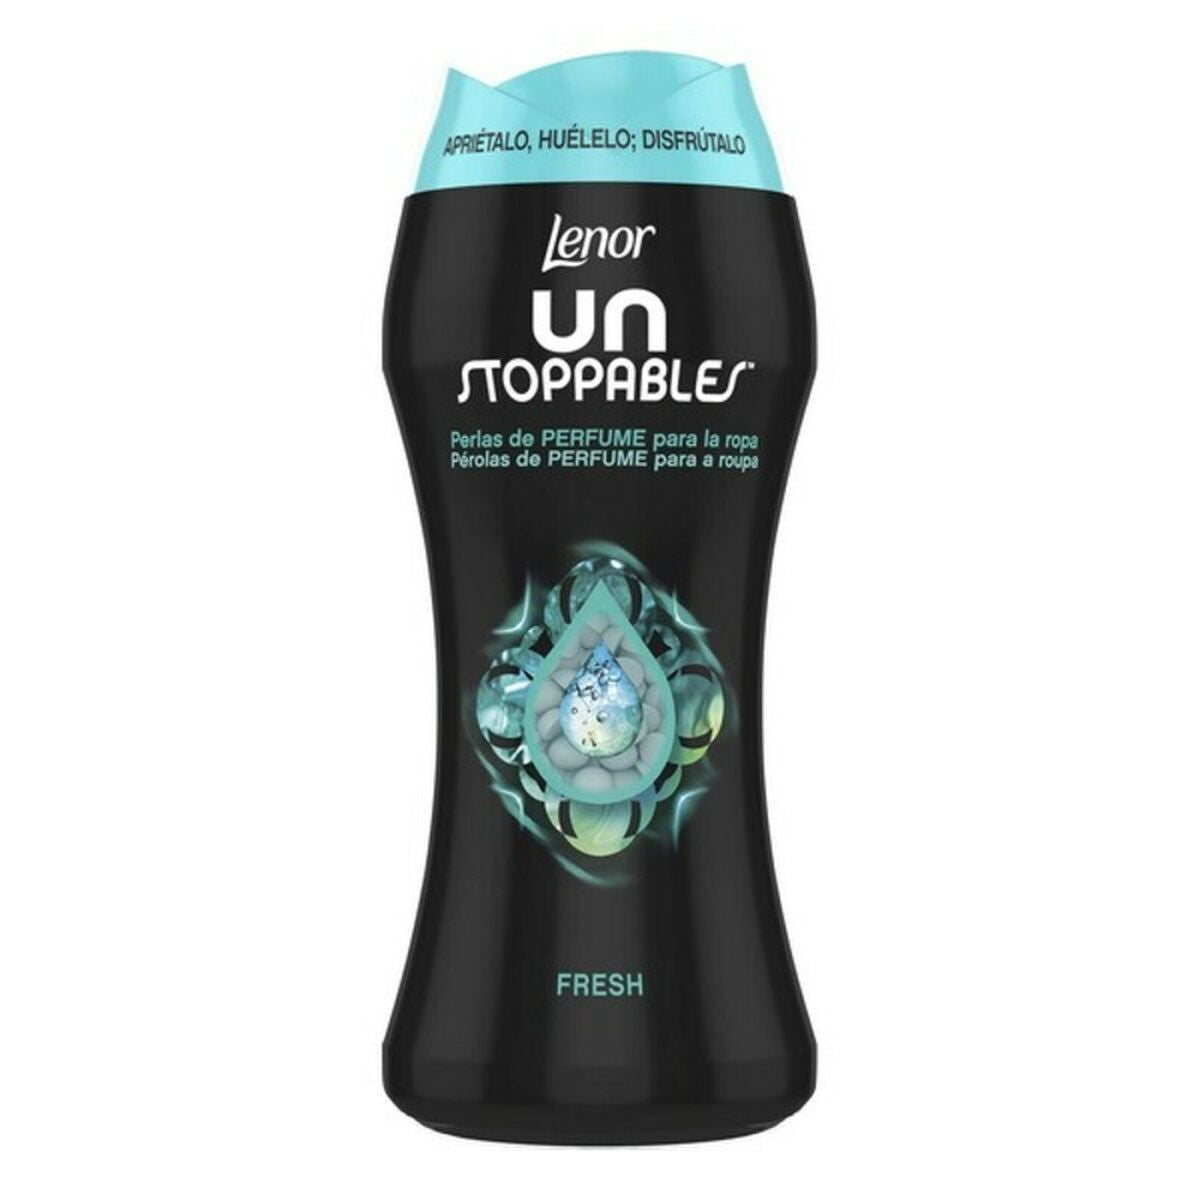 Fabric softener concentrate Unstoppables Fresh Lenor 81683958 (140 g)